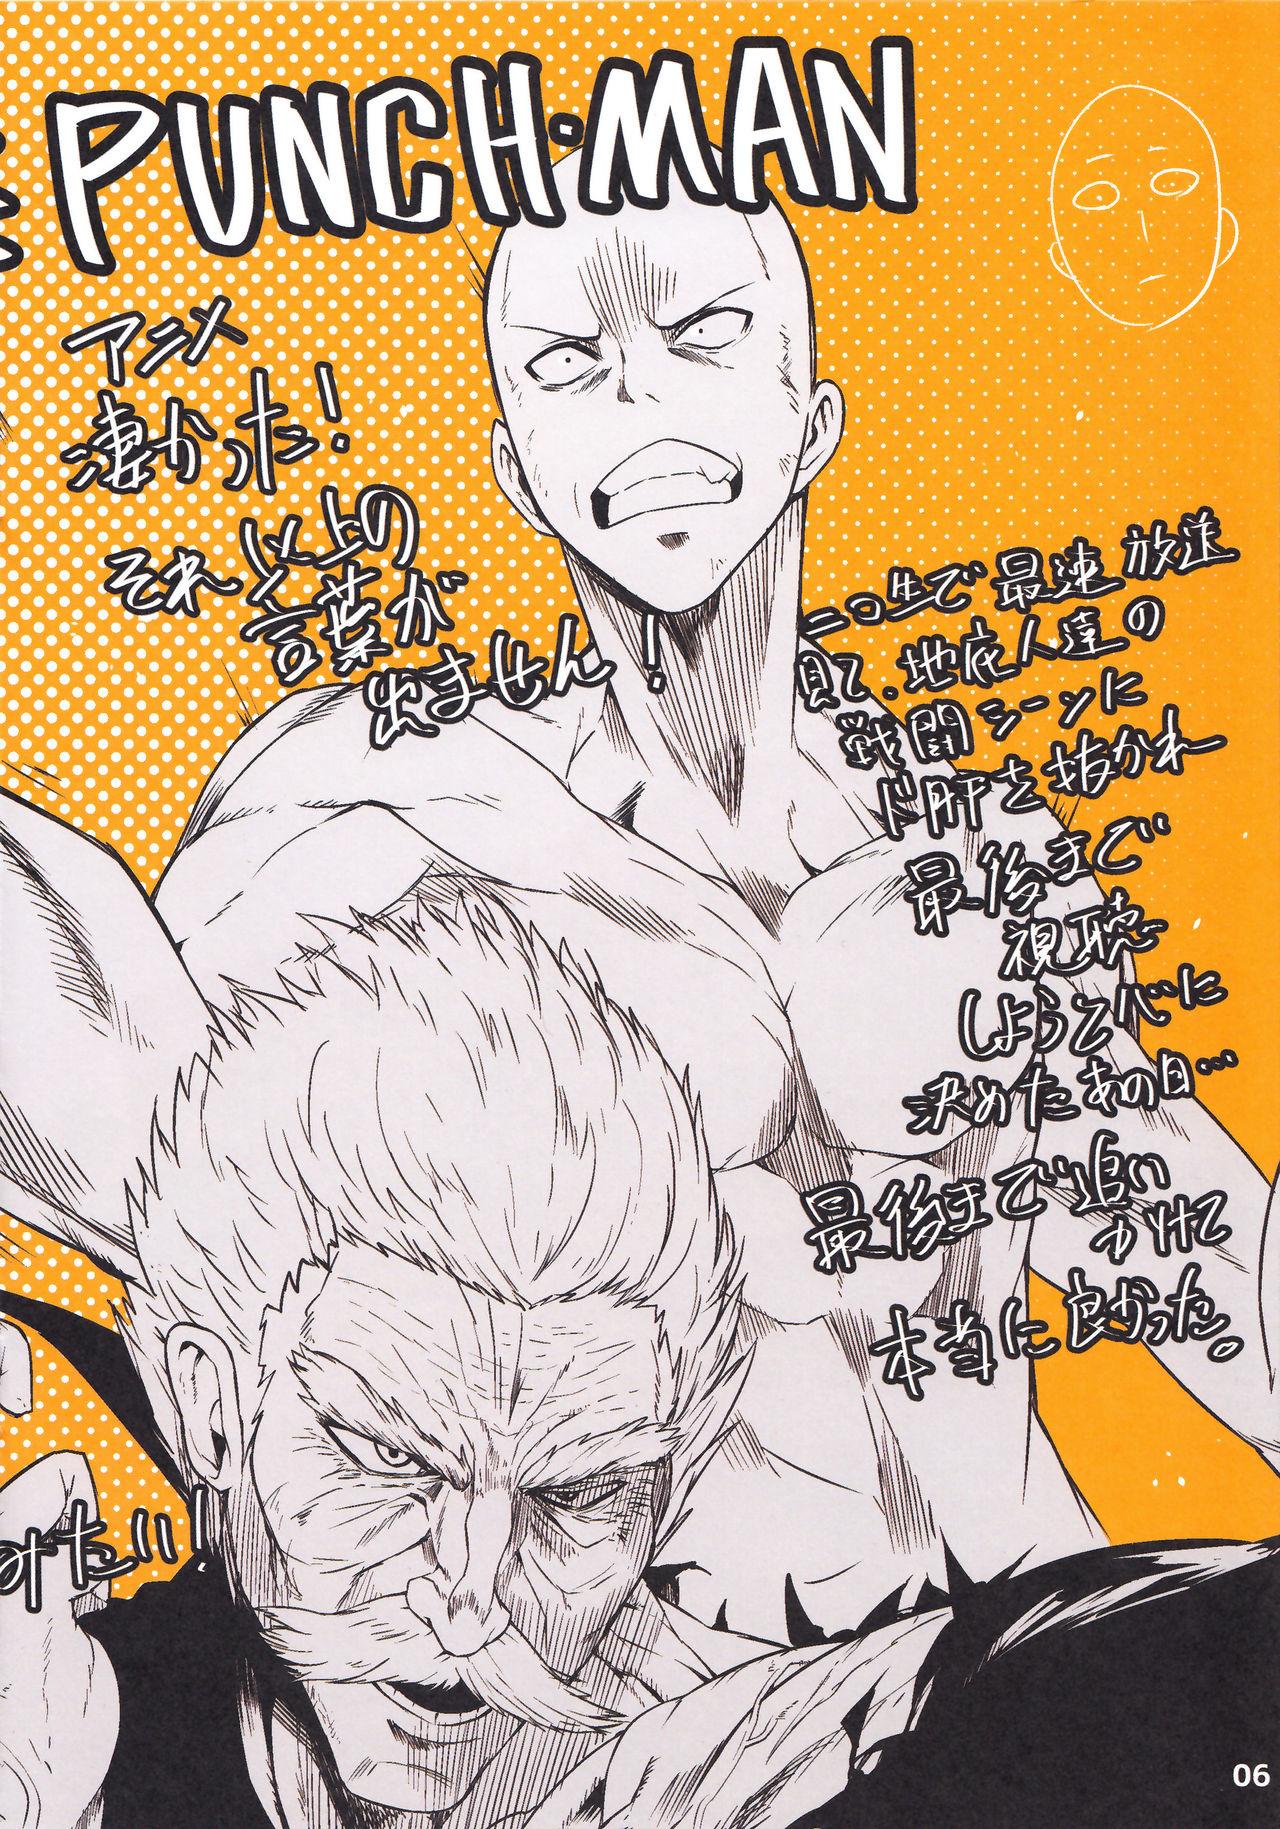 Monster Dick RORINOUTAGE DROWINGBOOK - One punch man Bro - Page 8